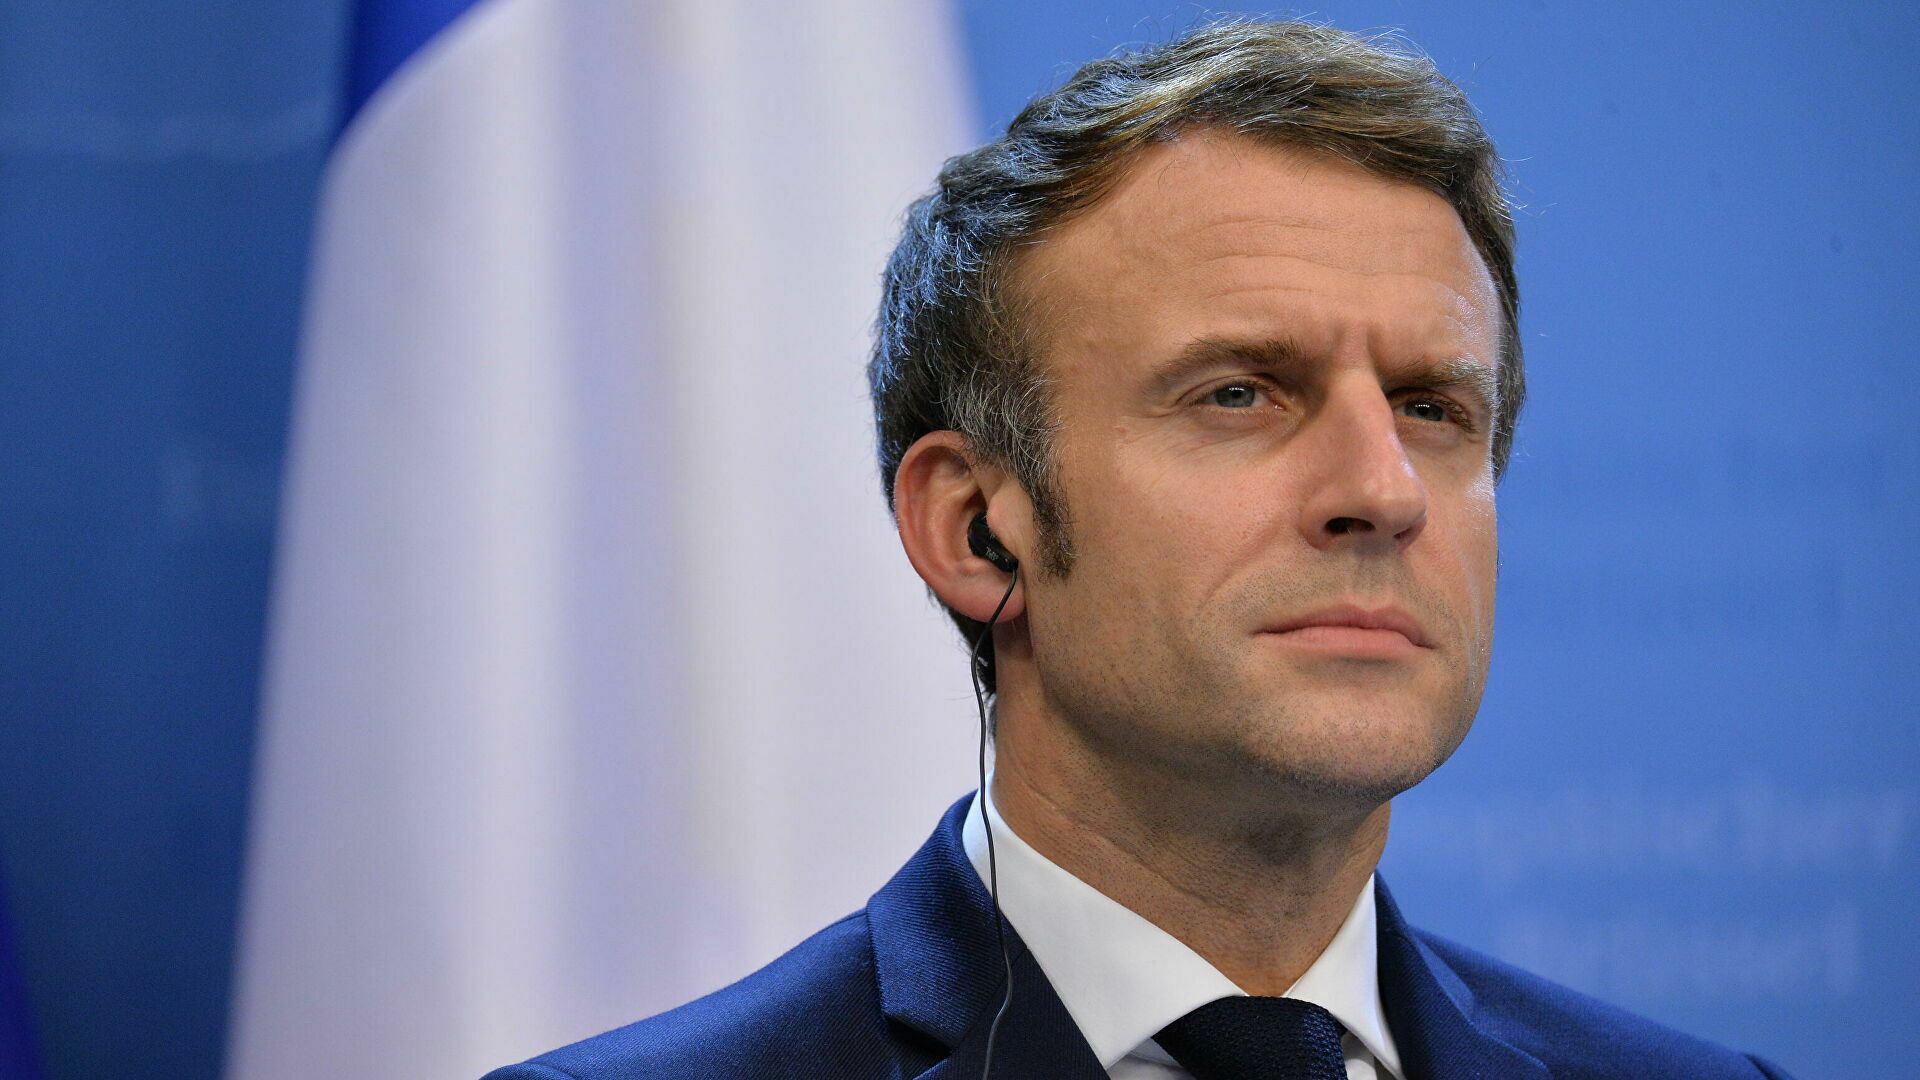 Macron refused to consider Russia's actions in Ukraine as genocide